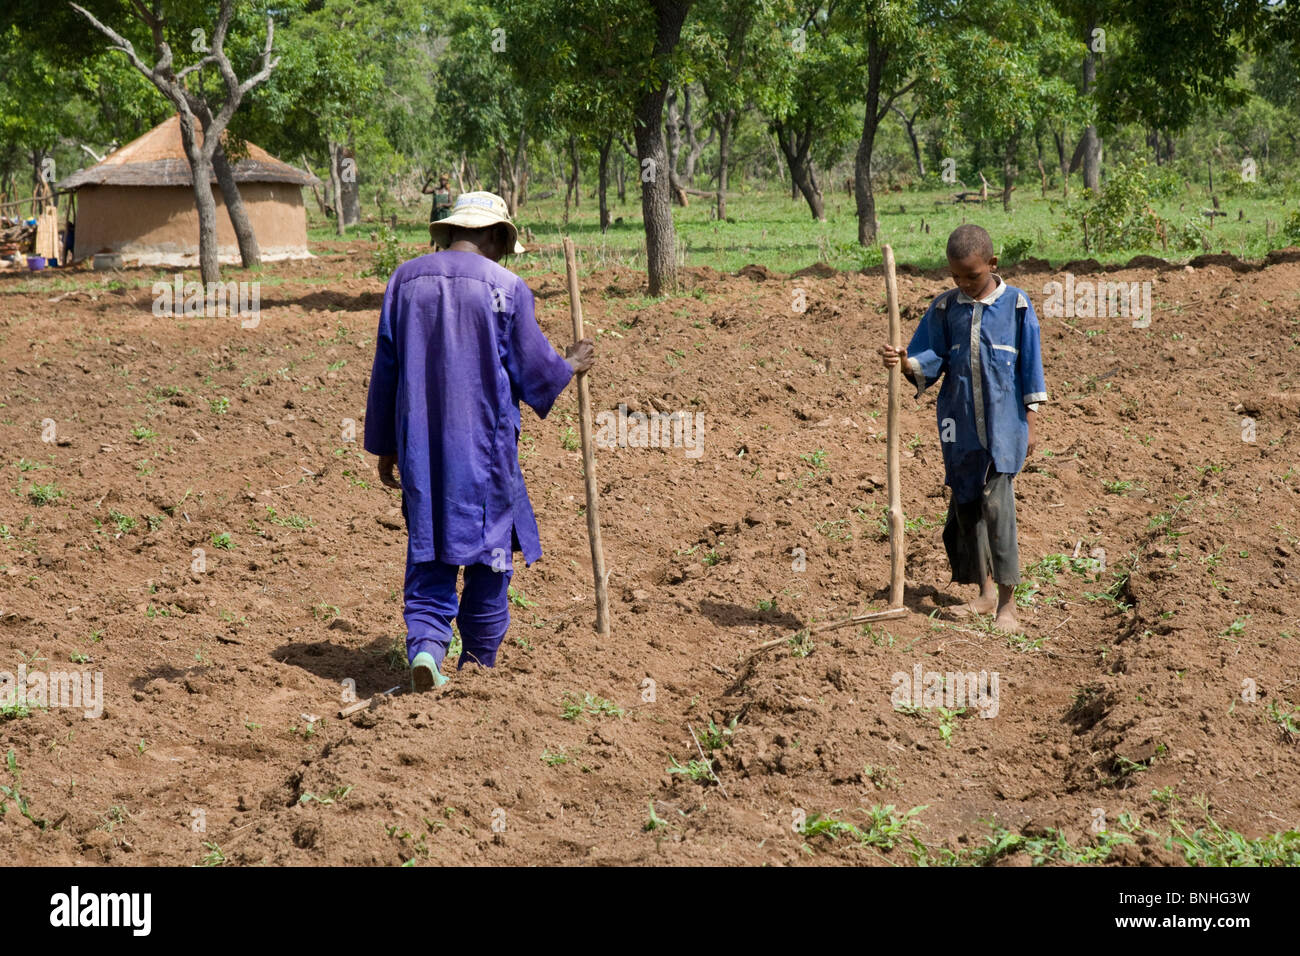 Sowing the maize crop in Ghana. They are making holes in the ridges of soil in which other children will sow maize seeds. Stock Photo